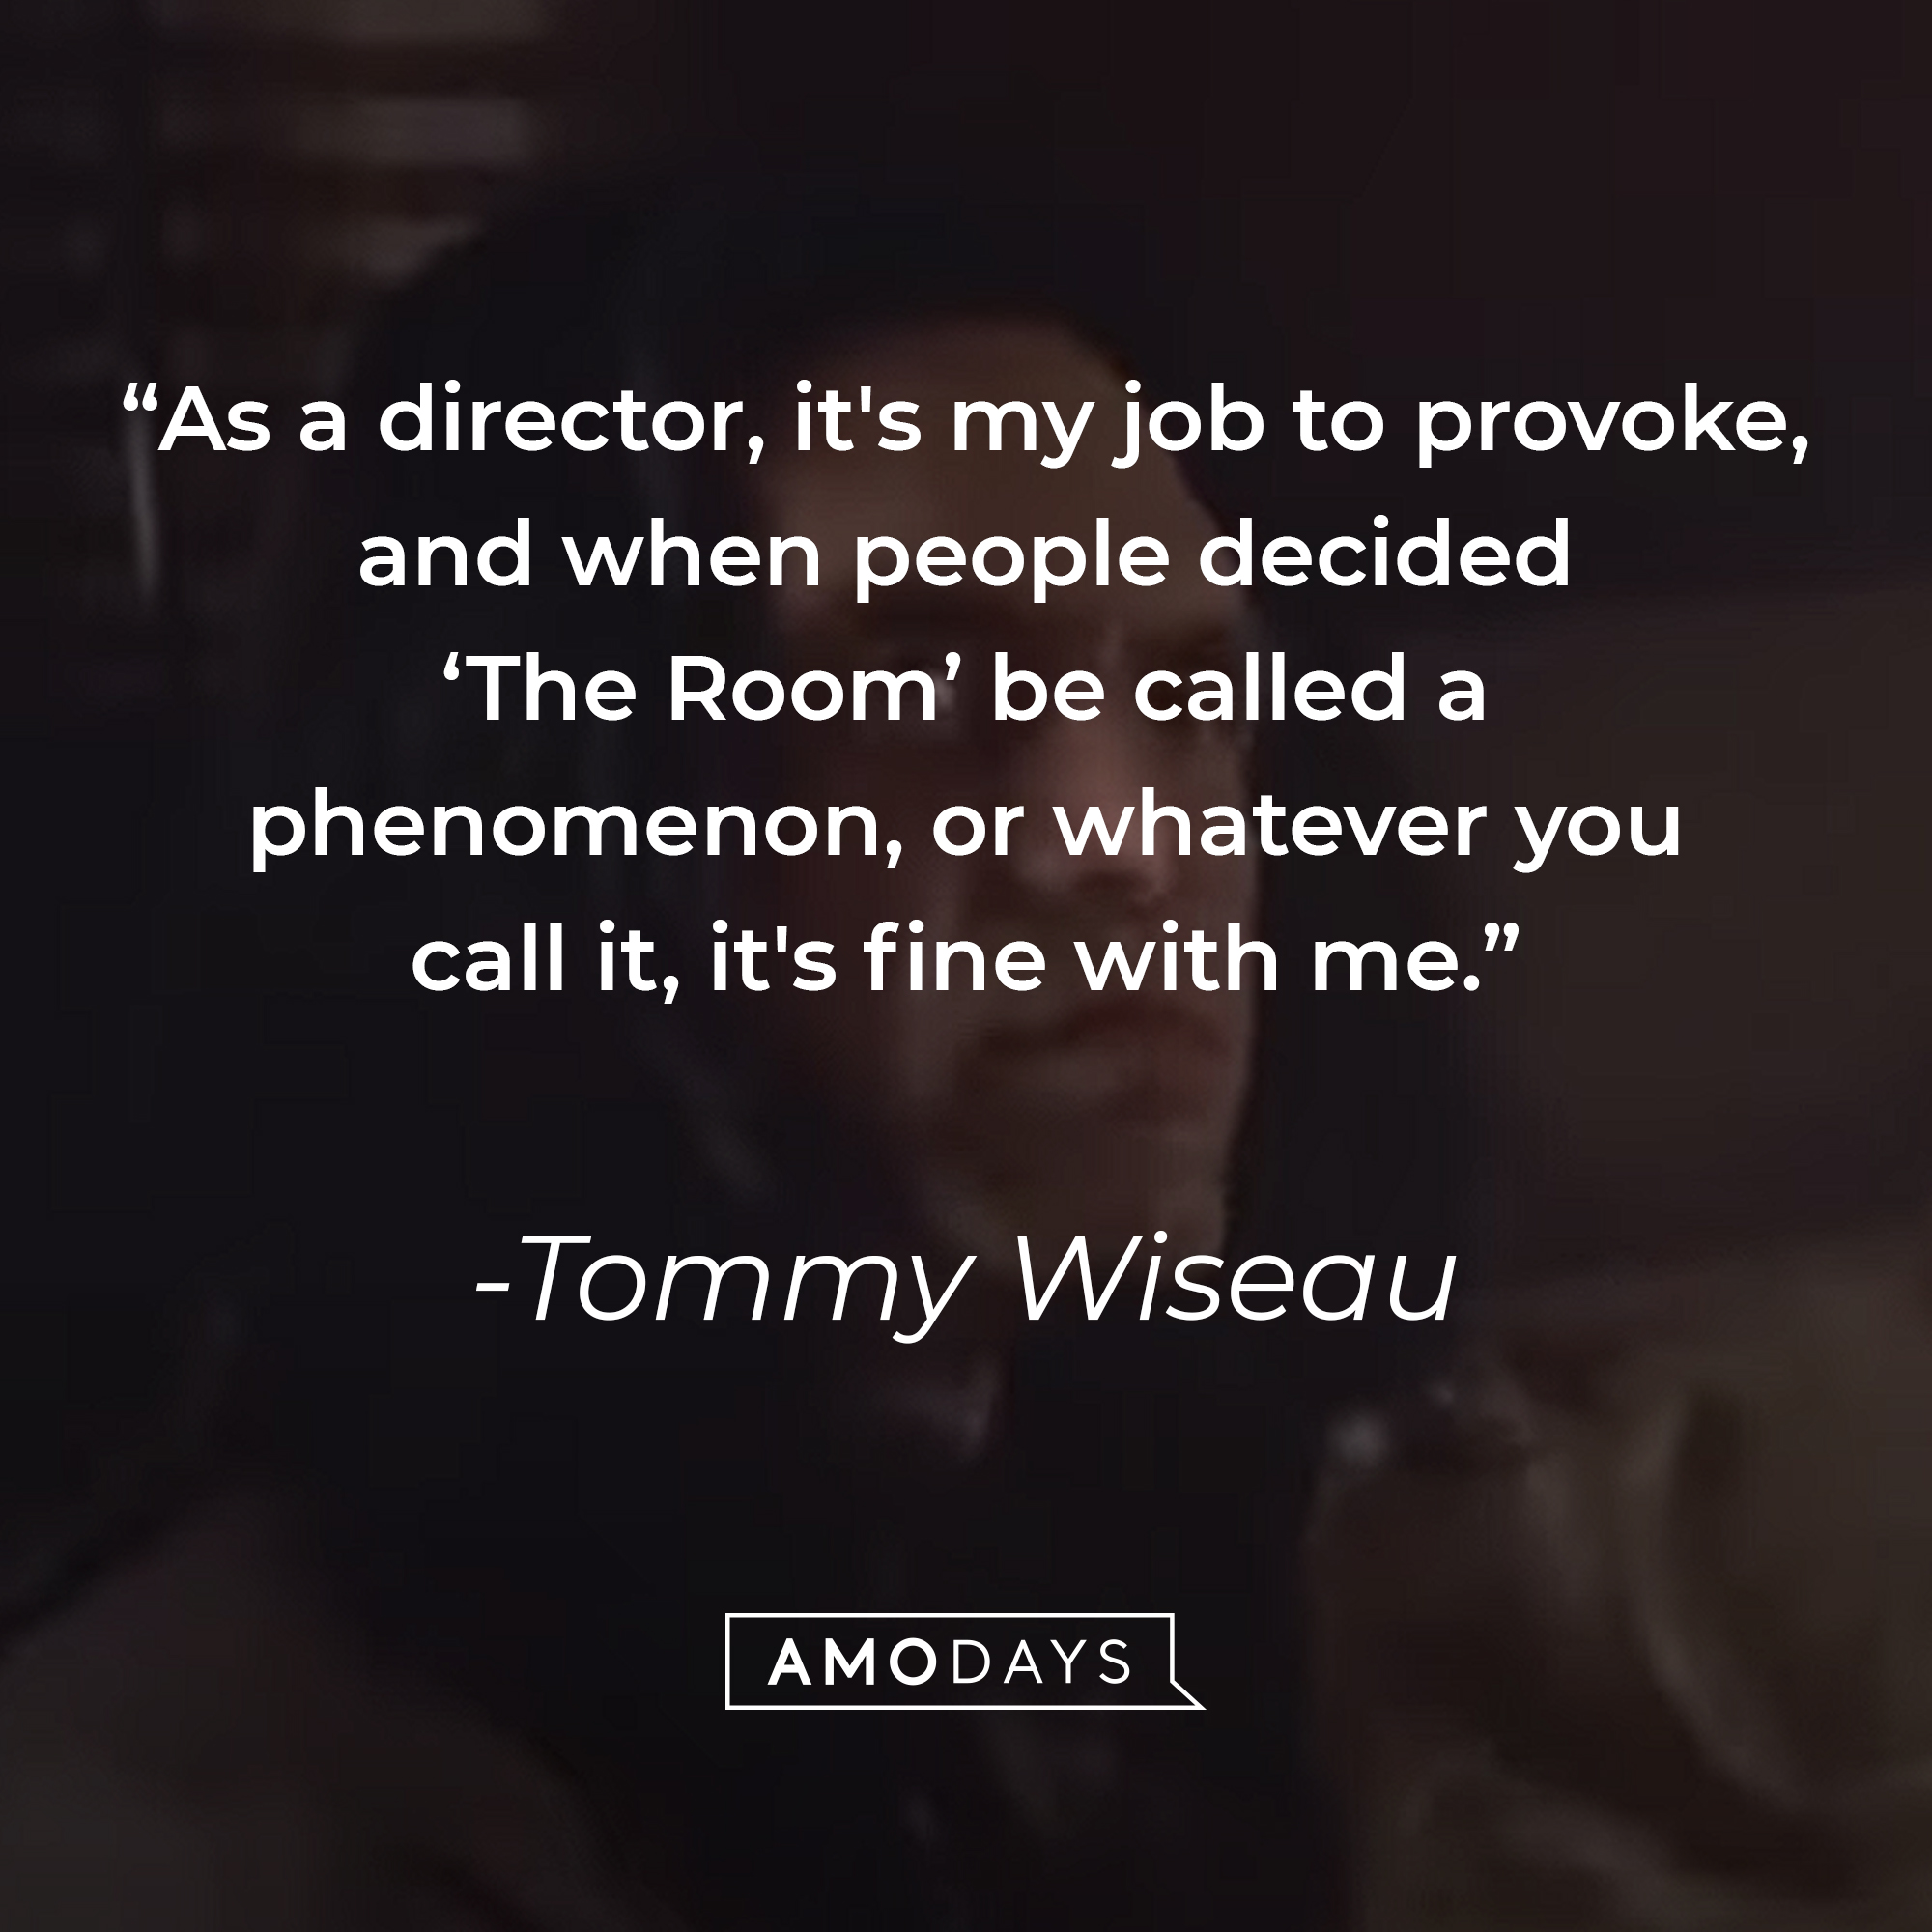 A photo from "The Room" with the quote, "As a director, it's my job to provoke, and when people decided 'The Room' be called a phenomenon, or whatever you call it, it's fine with me." | Source: YouTube/TommyWiseau